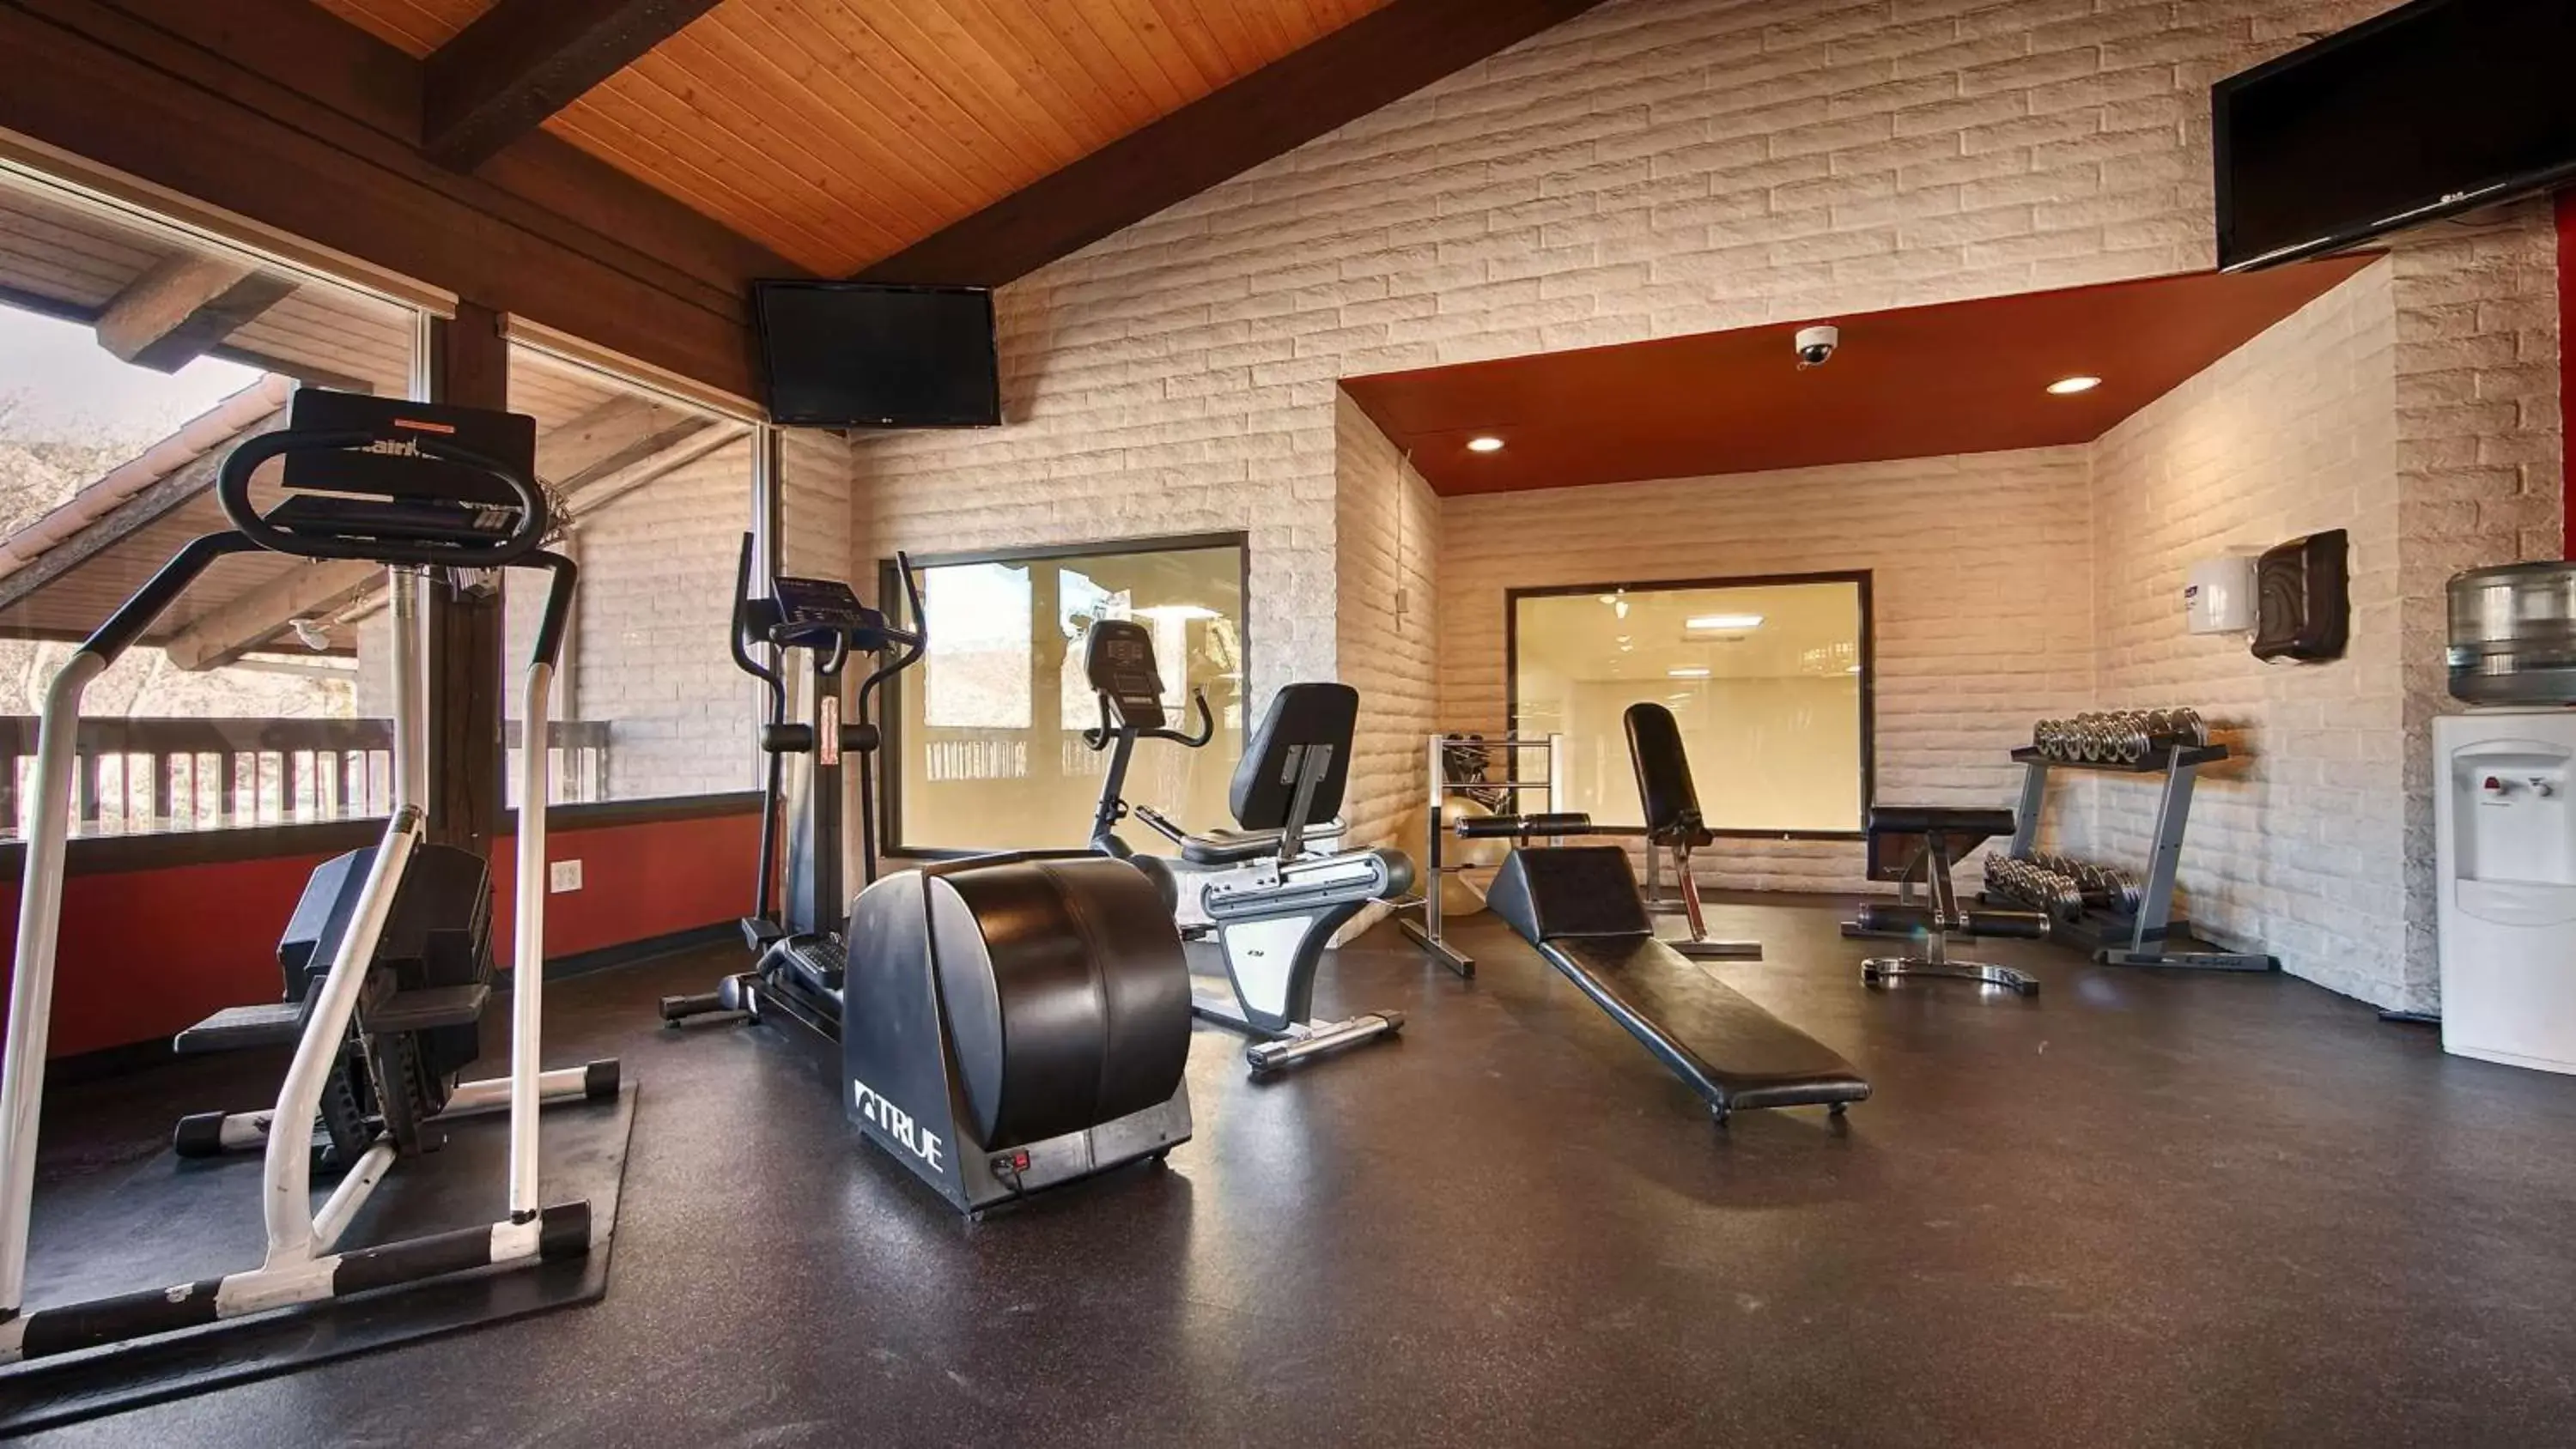 Fitness centre/facilities, Fitness Center/Facilities in Best Western Plus Arroyo Roble Hotel & Creekside Villas